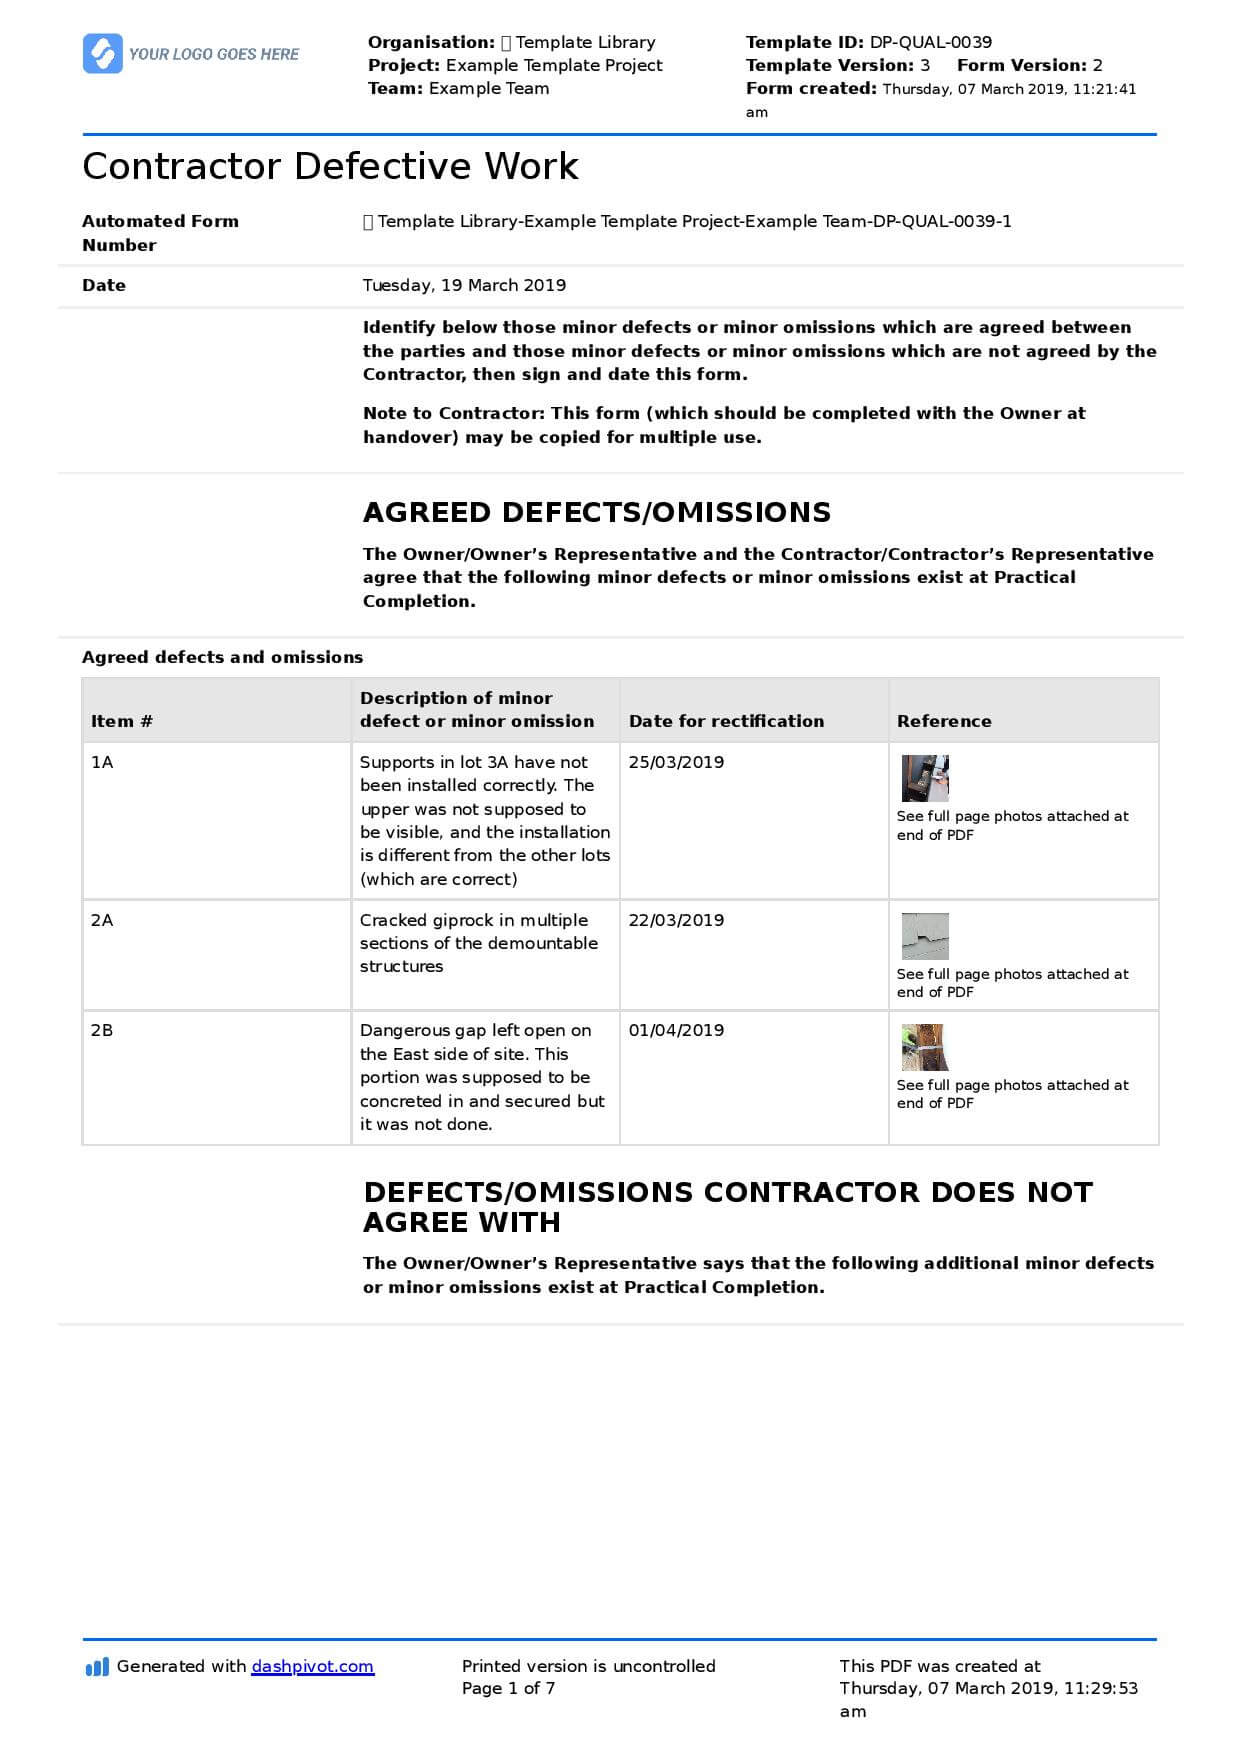 Letter To Contractor For Defective Work: Sample Letter And Within Building Defect Report Template